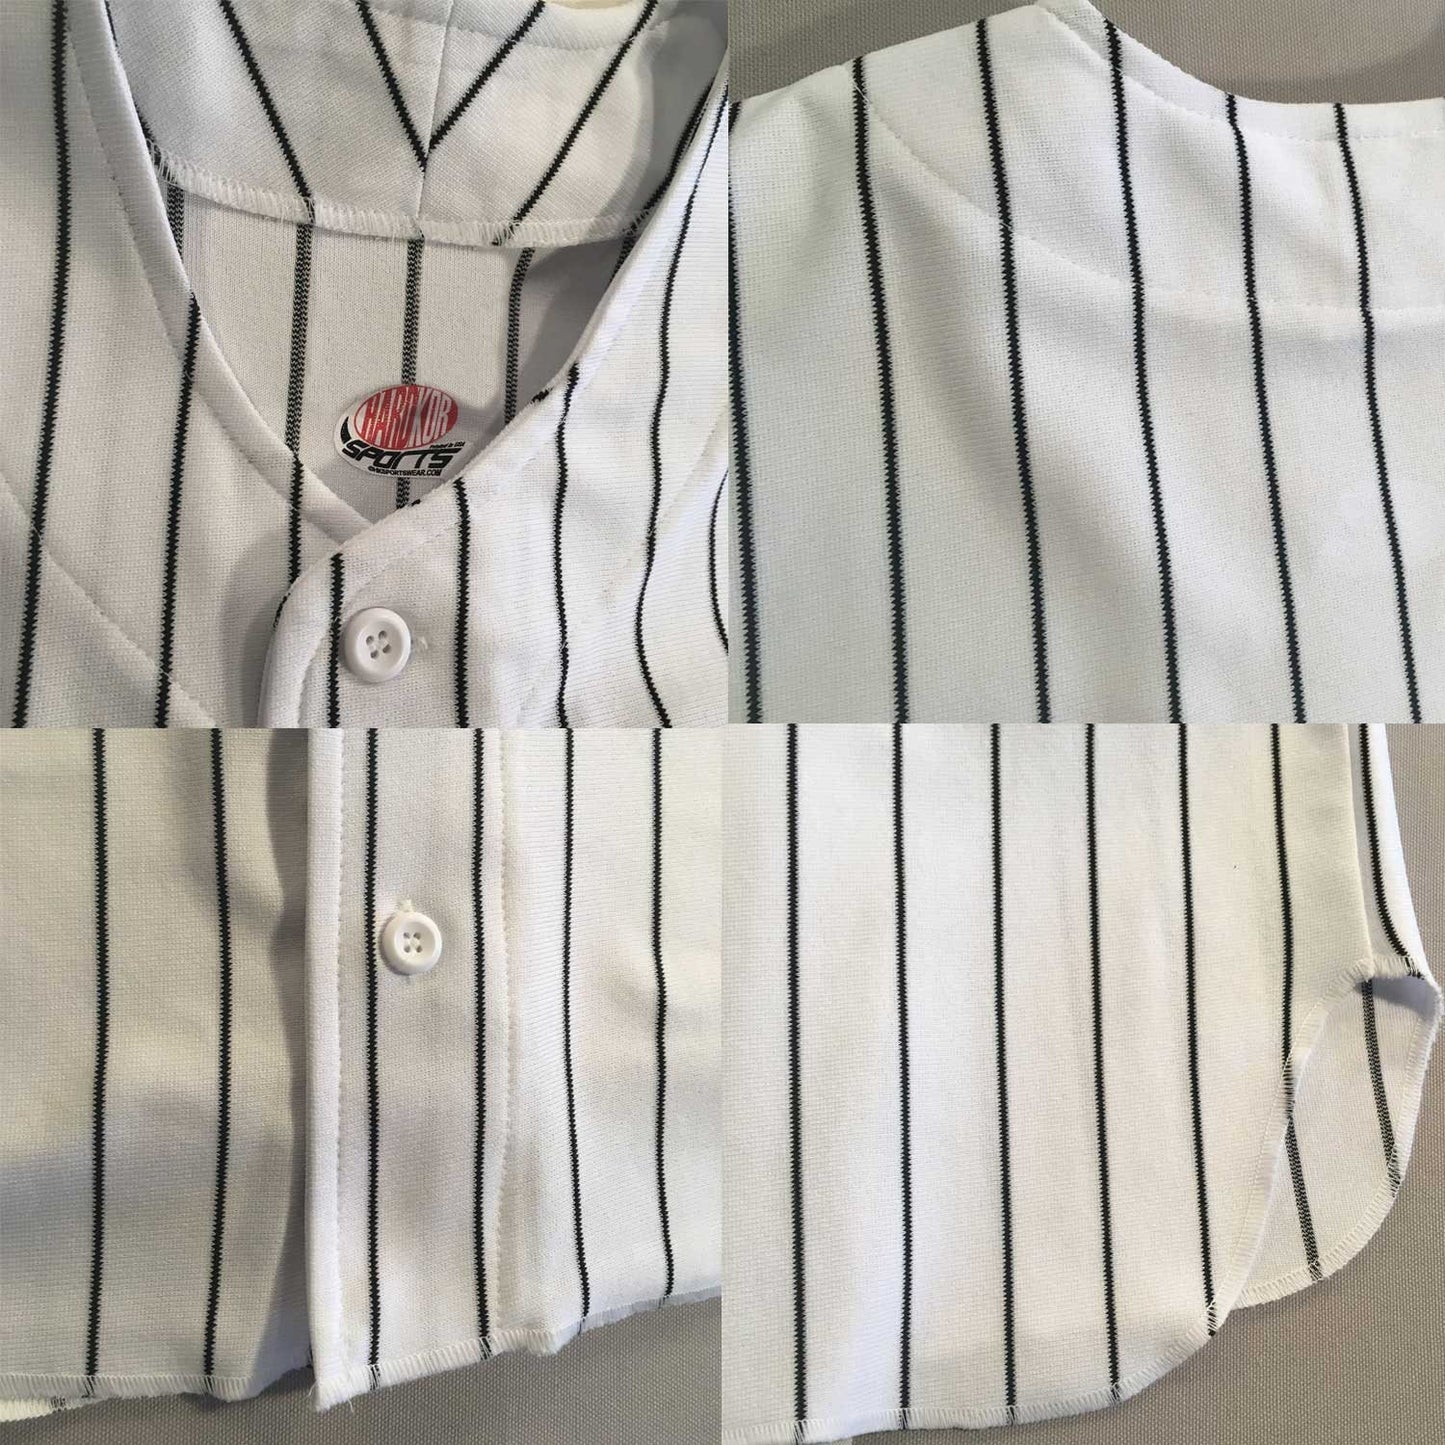 Custom Pinstriped Baseball Jersey| Full Button Down, White with VERY DARK Navy Blue Pinstripes Personalized Jersey with Team, Player, Number